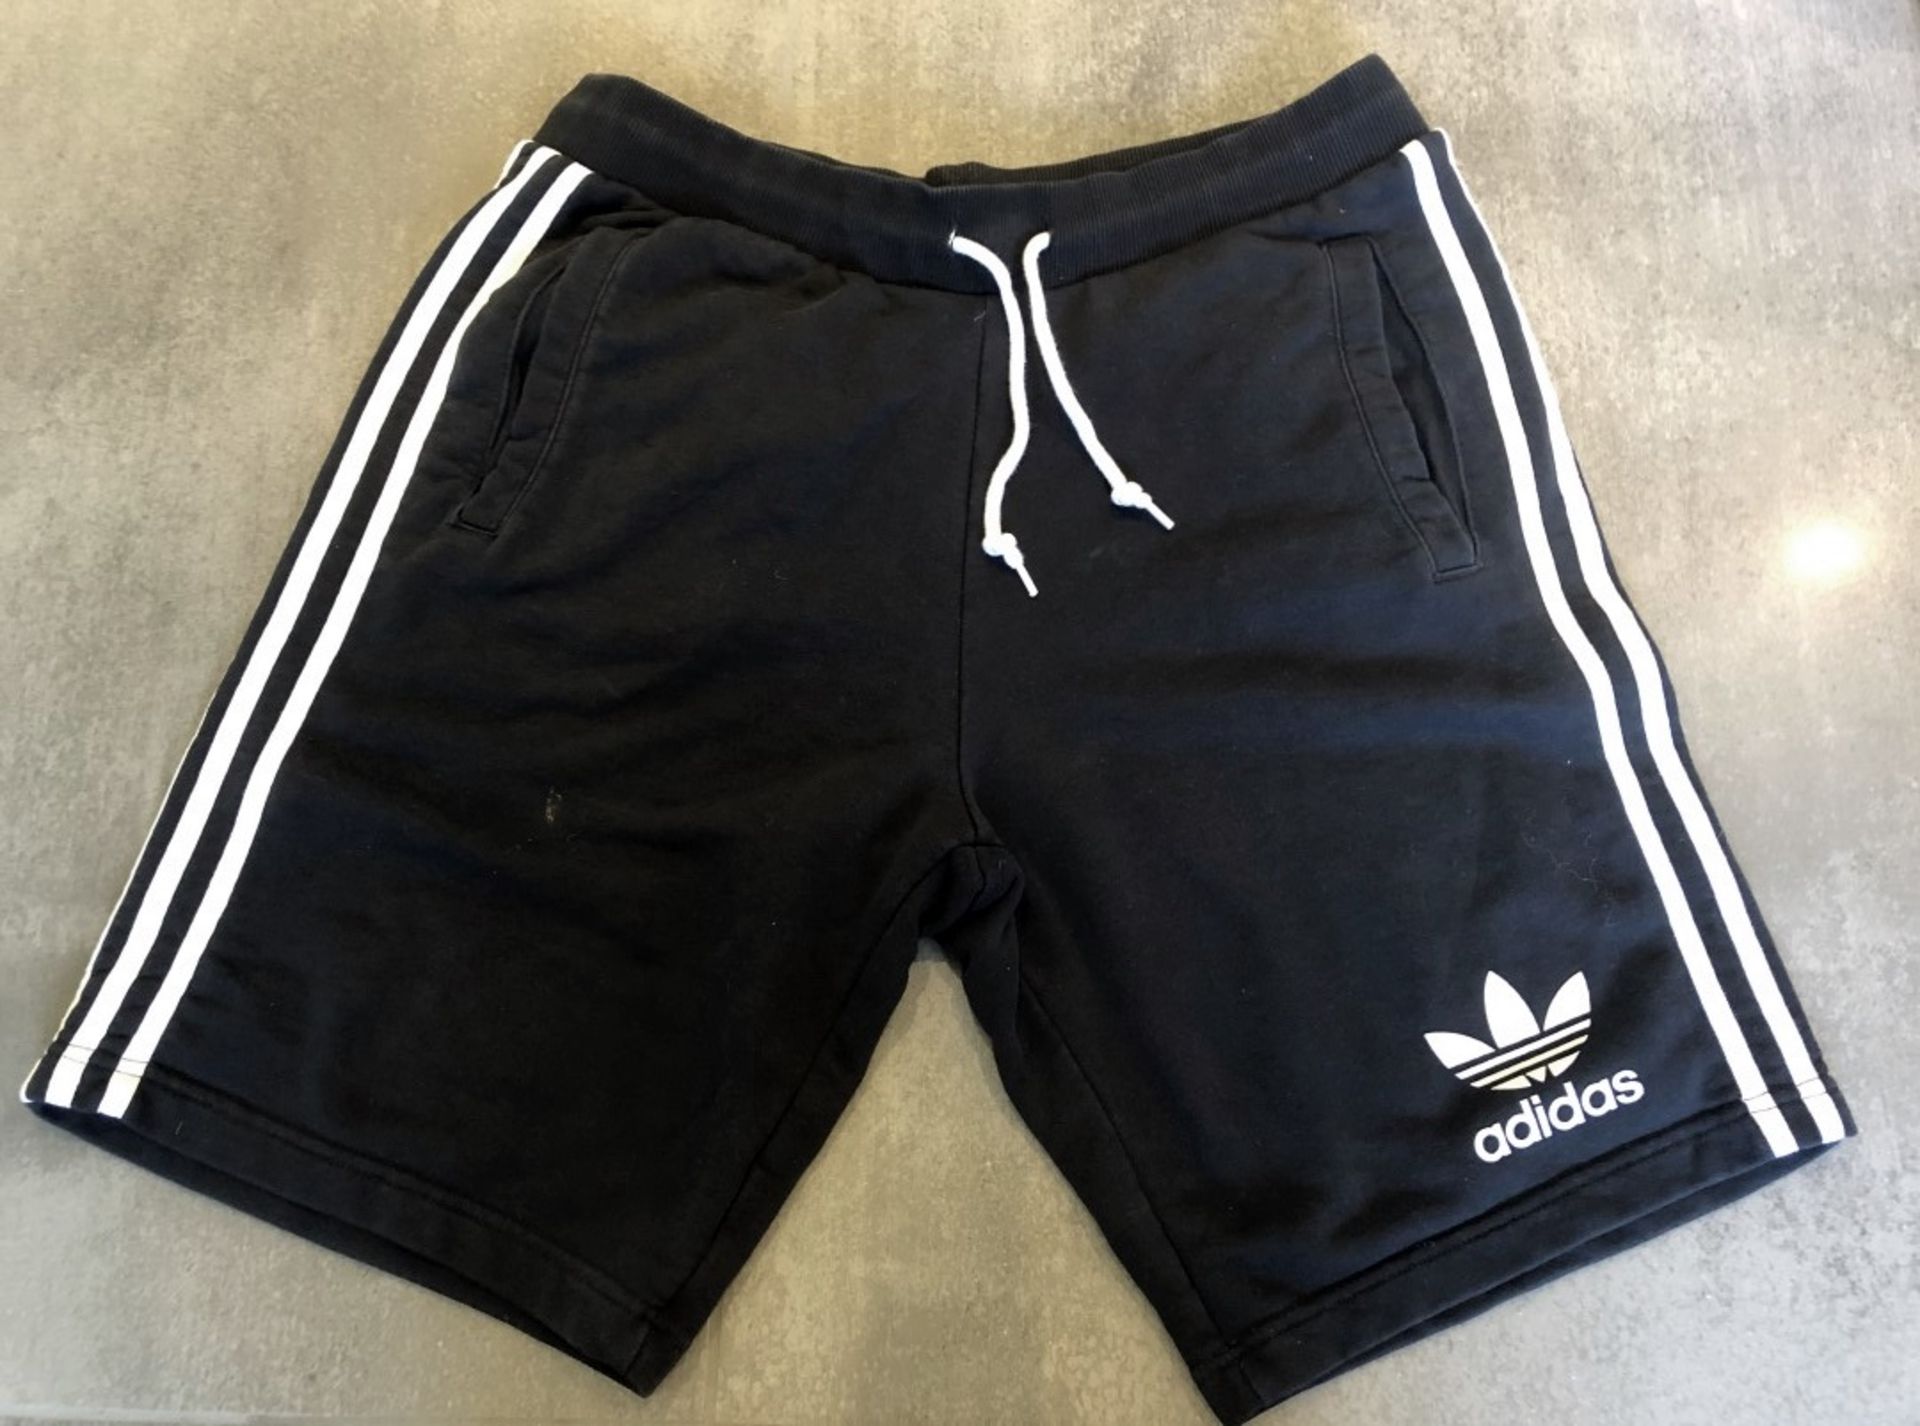 4 x Assorted Pairs Of Men's Genuine Adidas Shorts - AllIn Black - Sizes: L-XL - Preowned